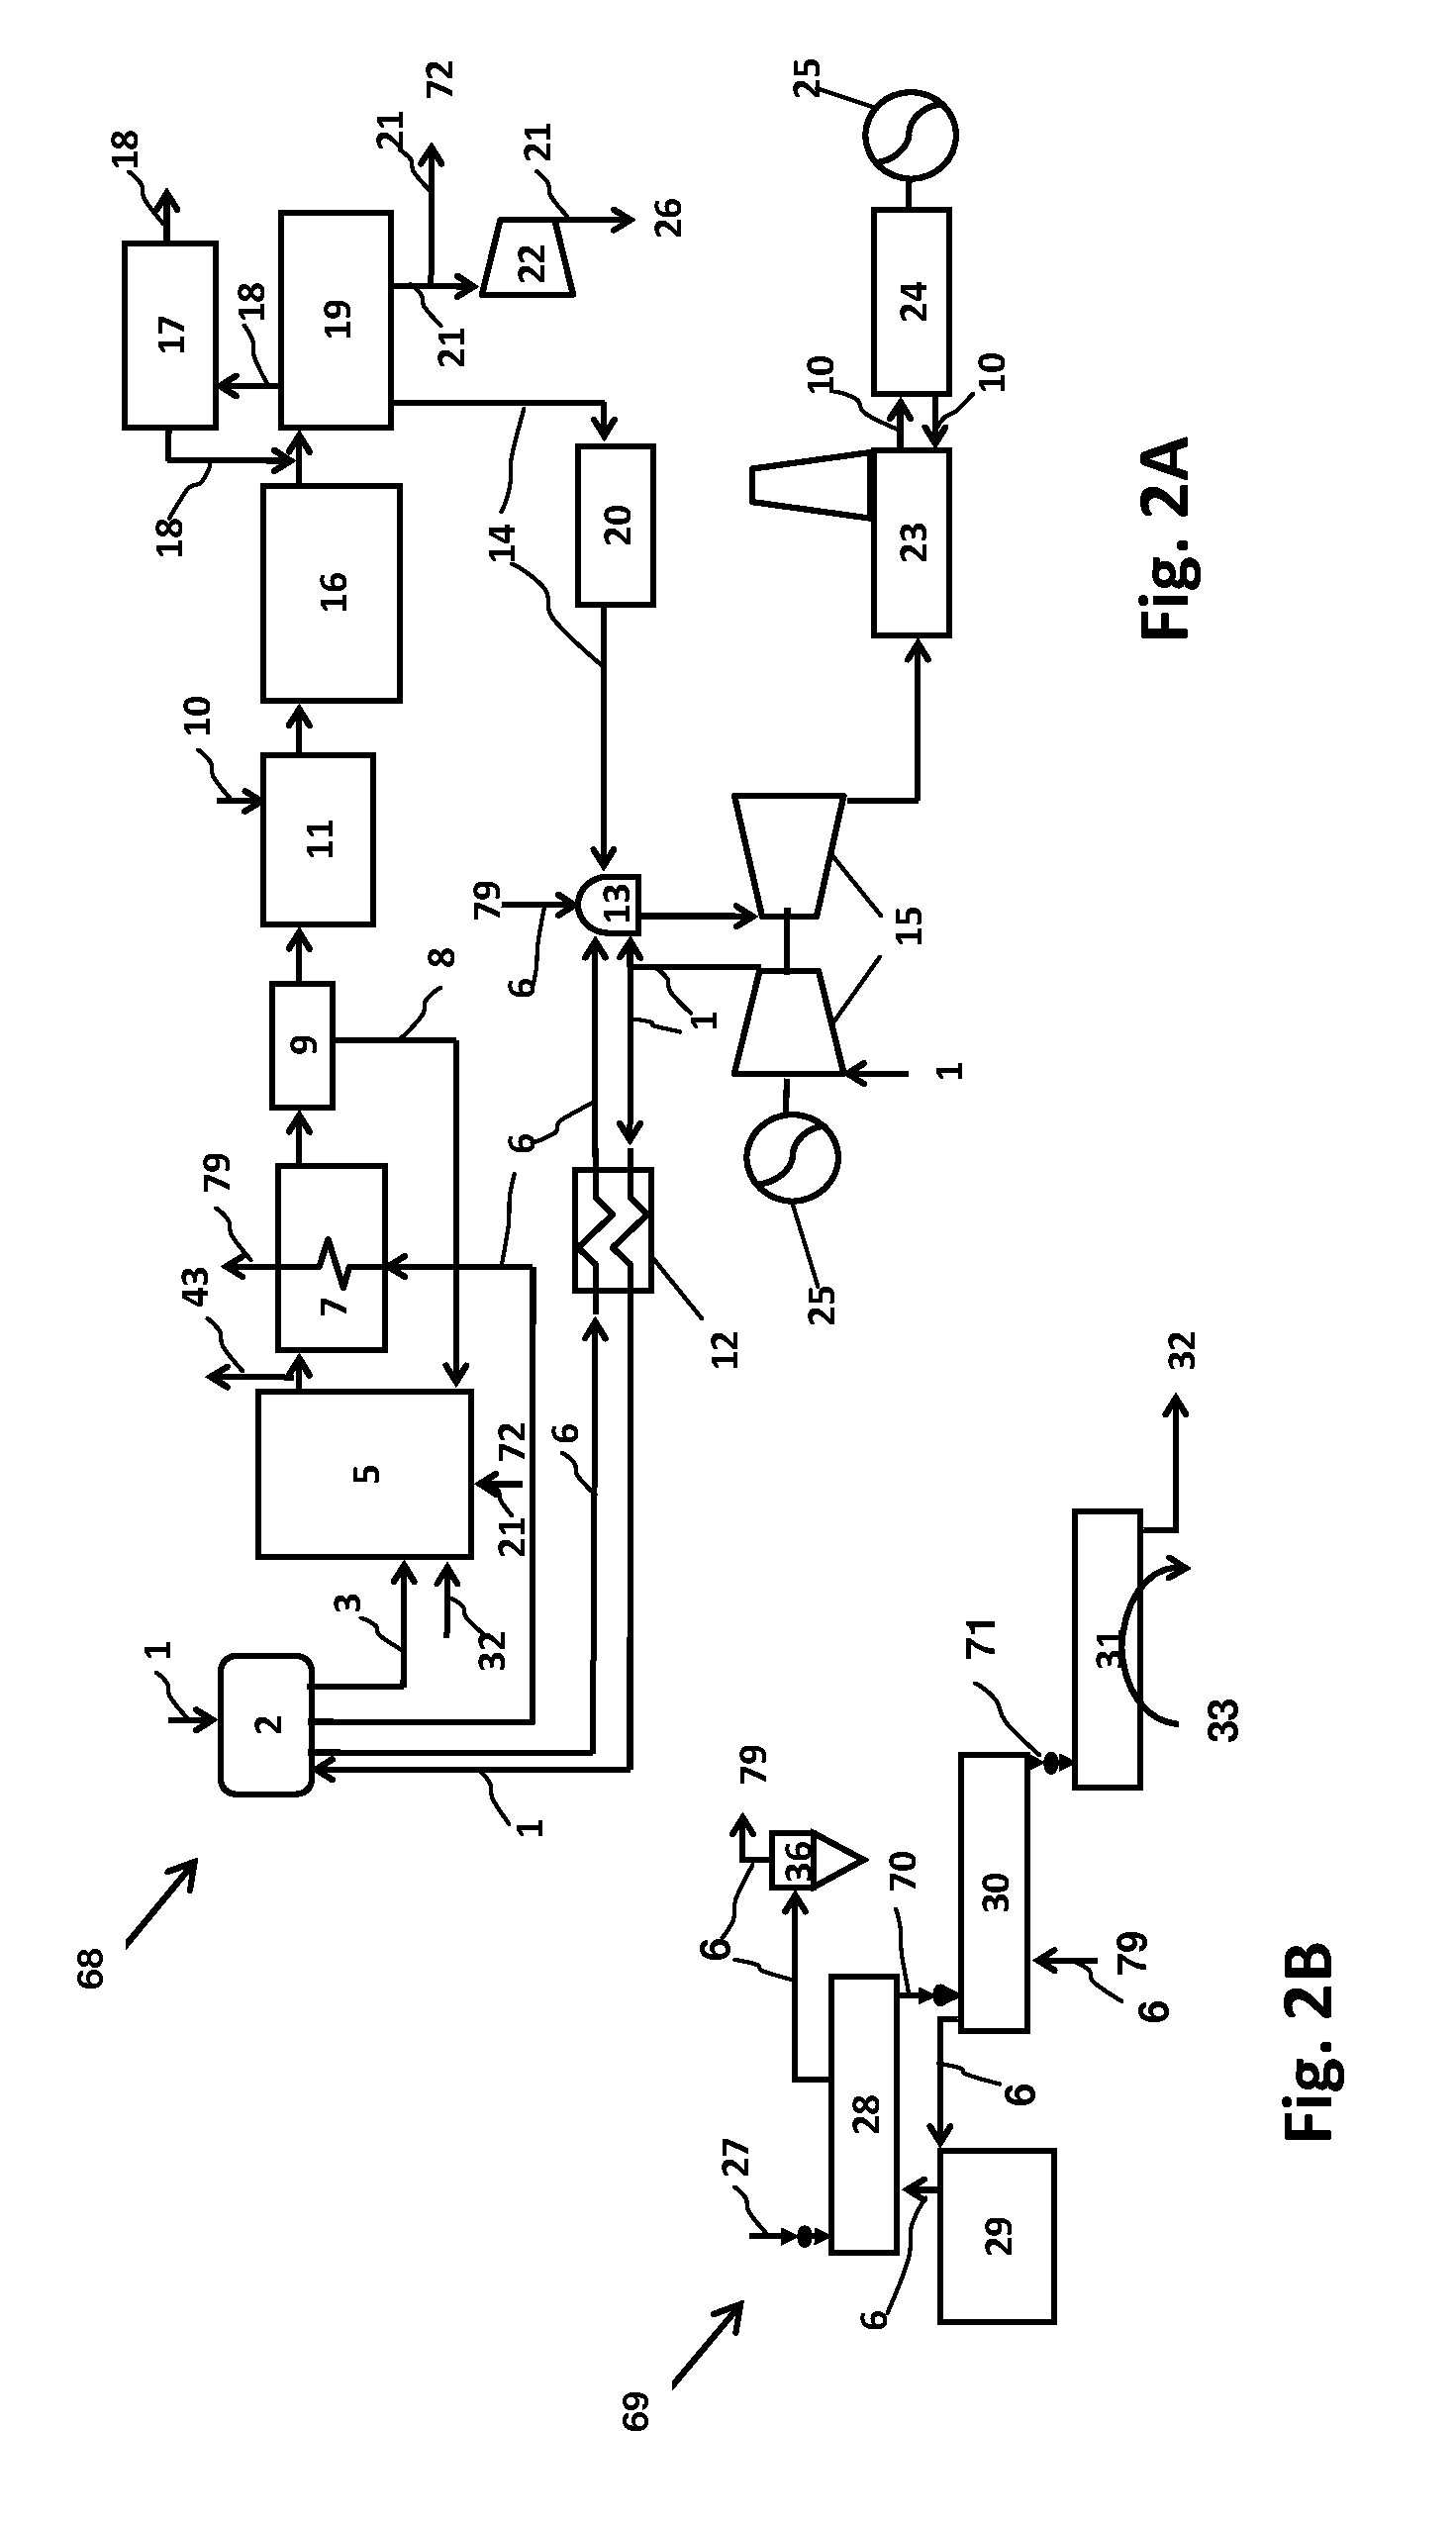 Efficient low rank coal gasification, combustion, and processing systems and methods